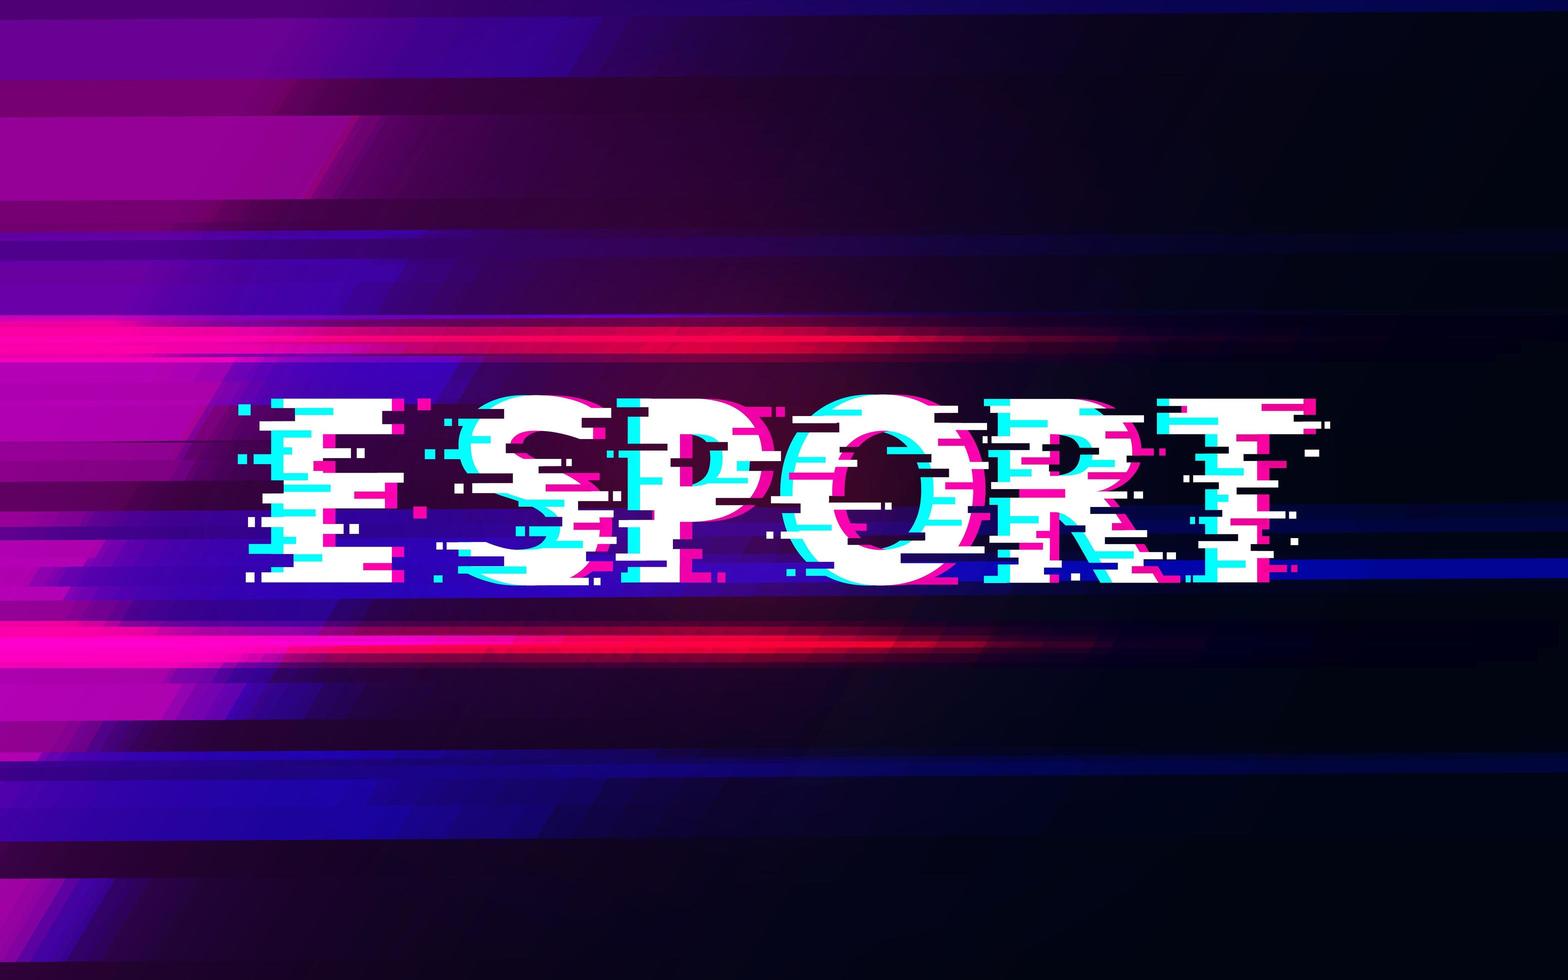 E sport glitch on colorful dynamic background vector